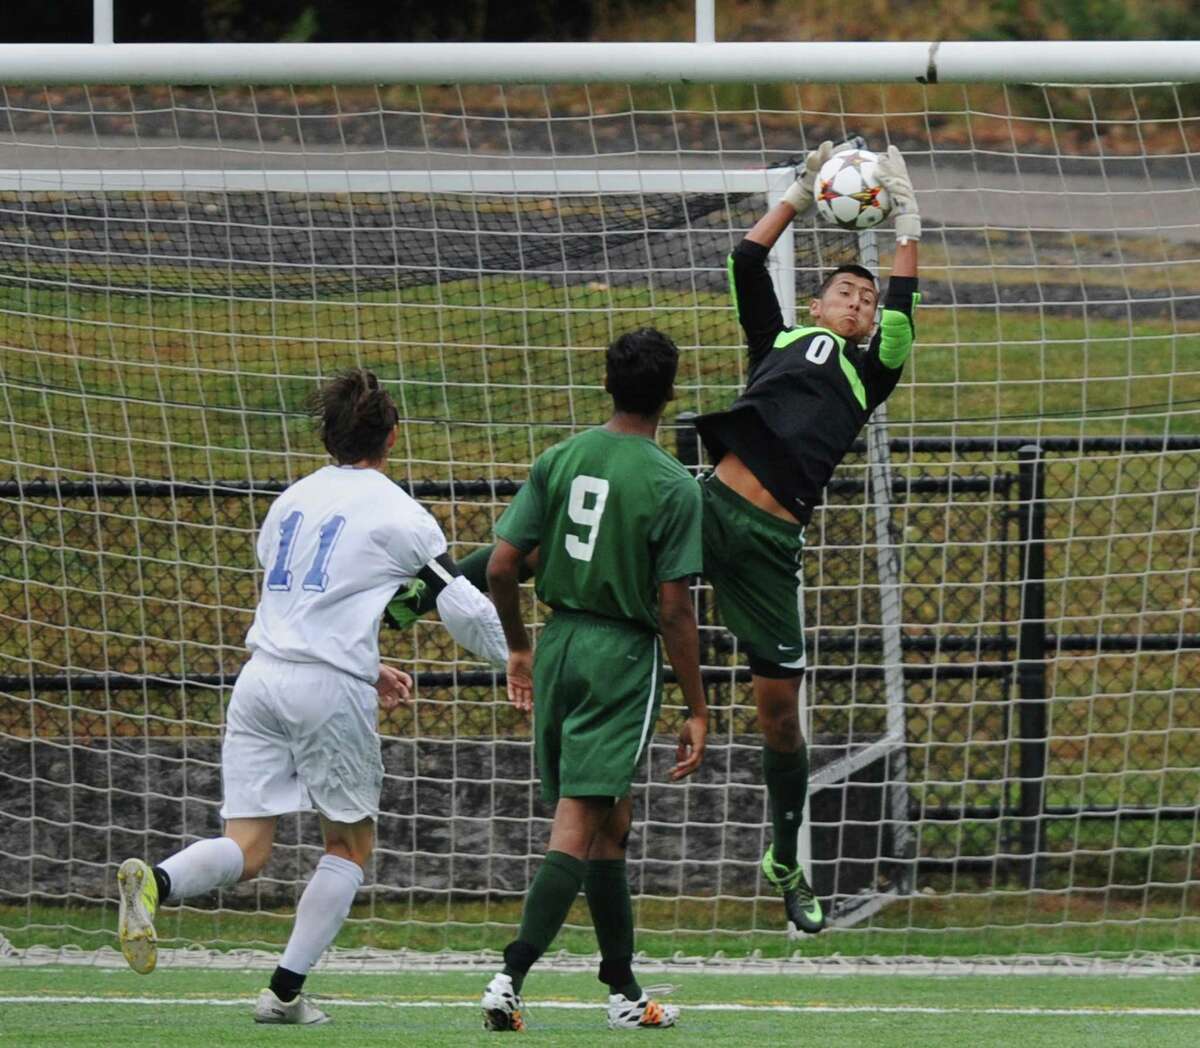 New Milford goalie Adam Llerena (0) jumps to make a save in New Milford's 4-0 win over Newtown in the high school soccer game at Treadwell Town Park in Sandy Hook, Conn. Tuesday, Sept. 30, 2014.